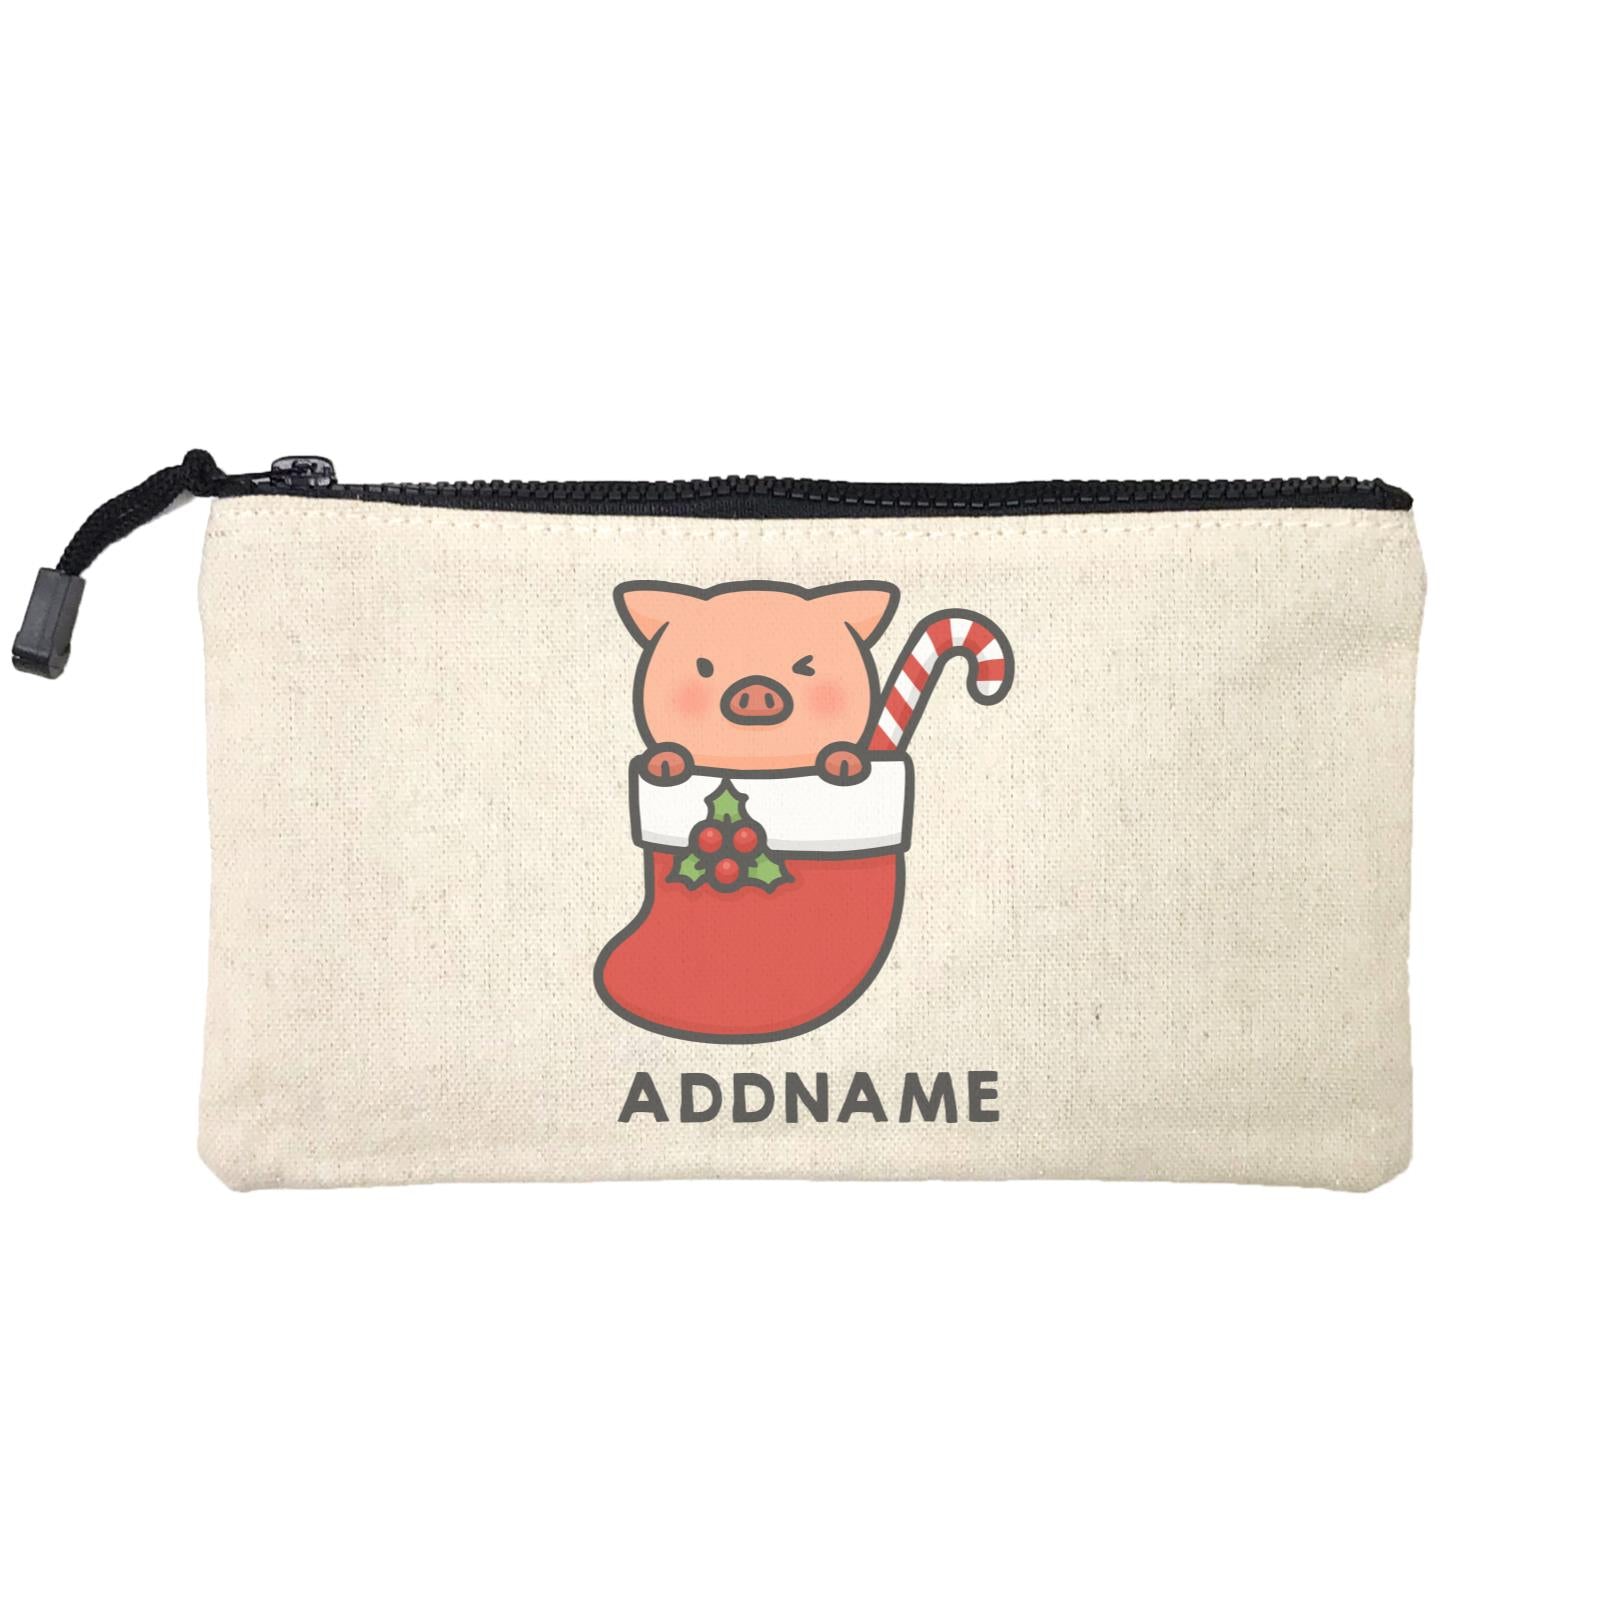 Xmas Cute Pig In Christmas Sock Addname Mini Accessories Stationery Pouch